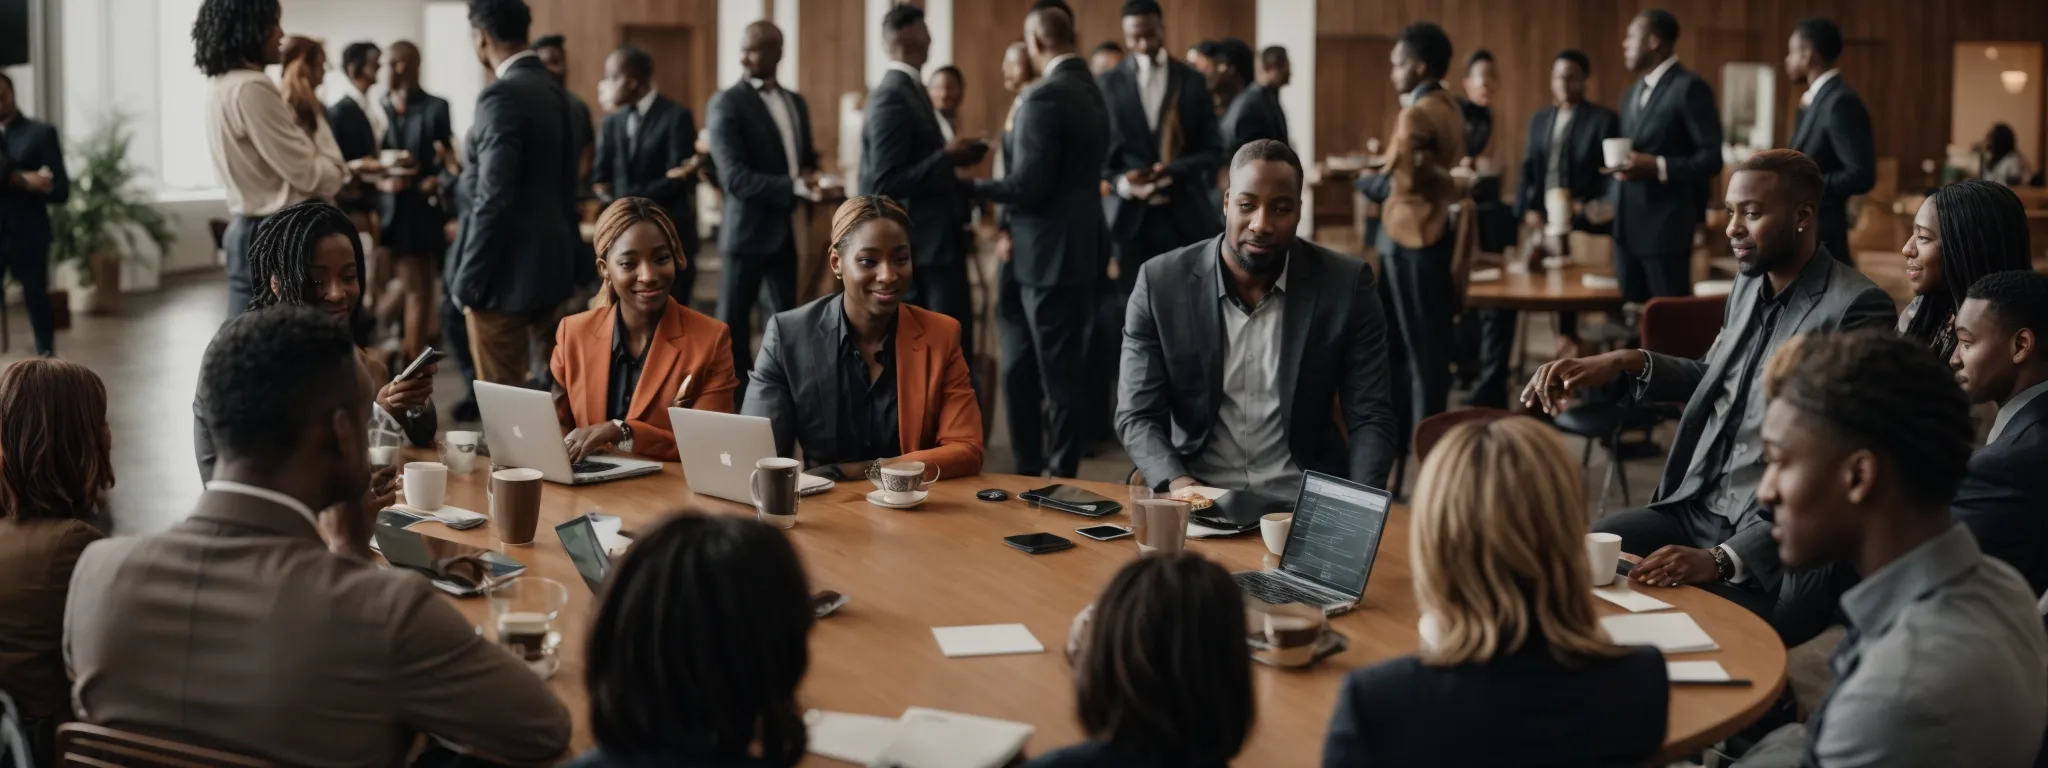 a diverse group of professionals at a roundtable discussion, with laptops open and coffee cups strewn about, while engaging in a vibrant networking event.